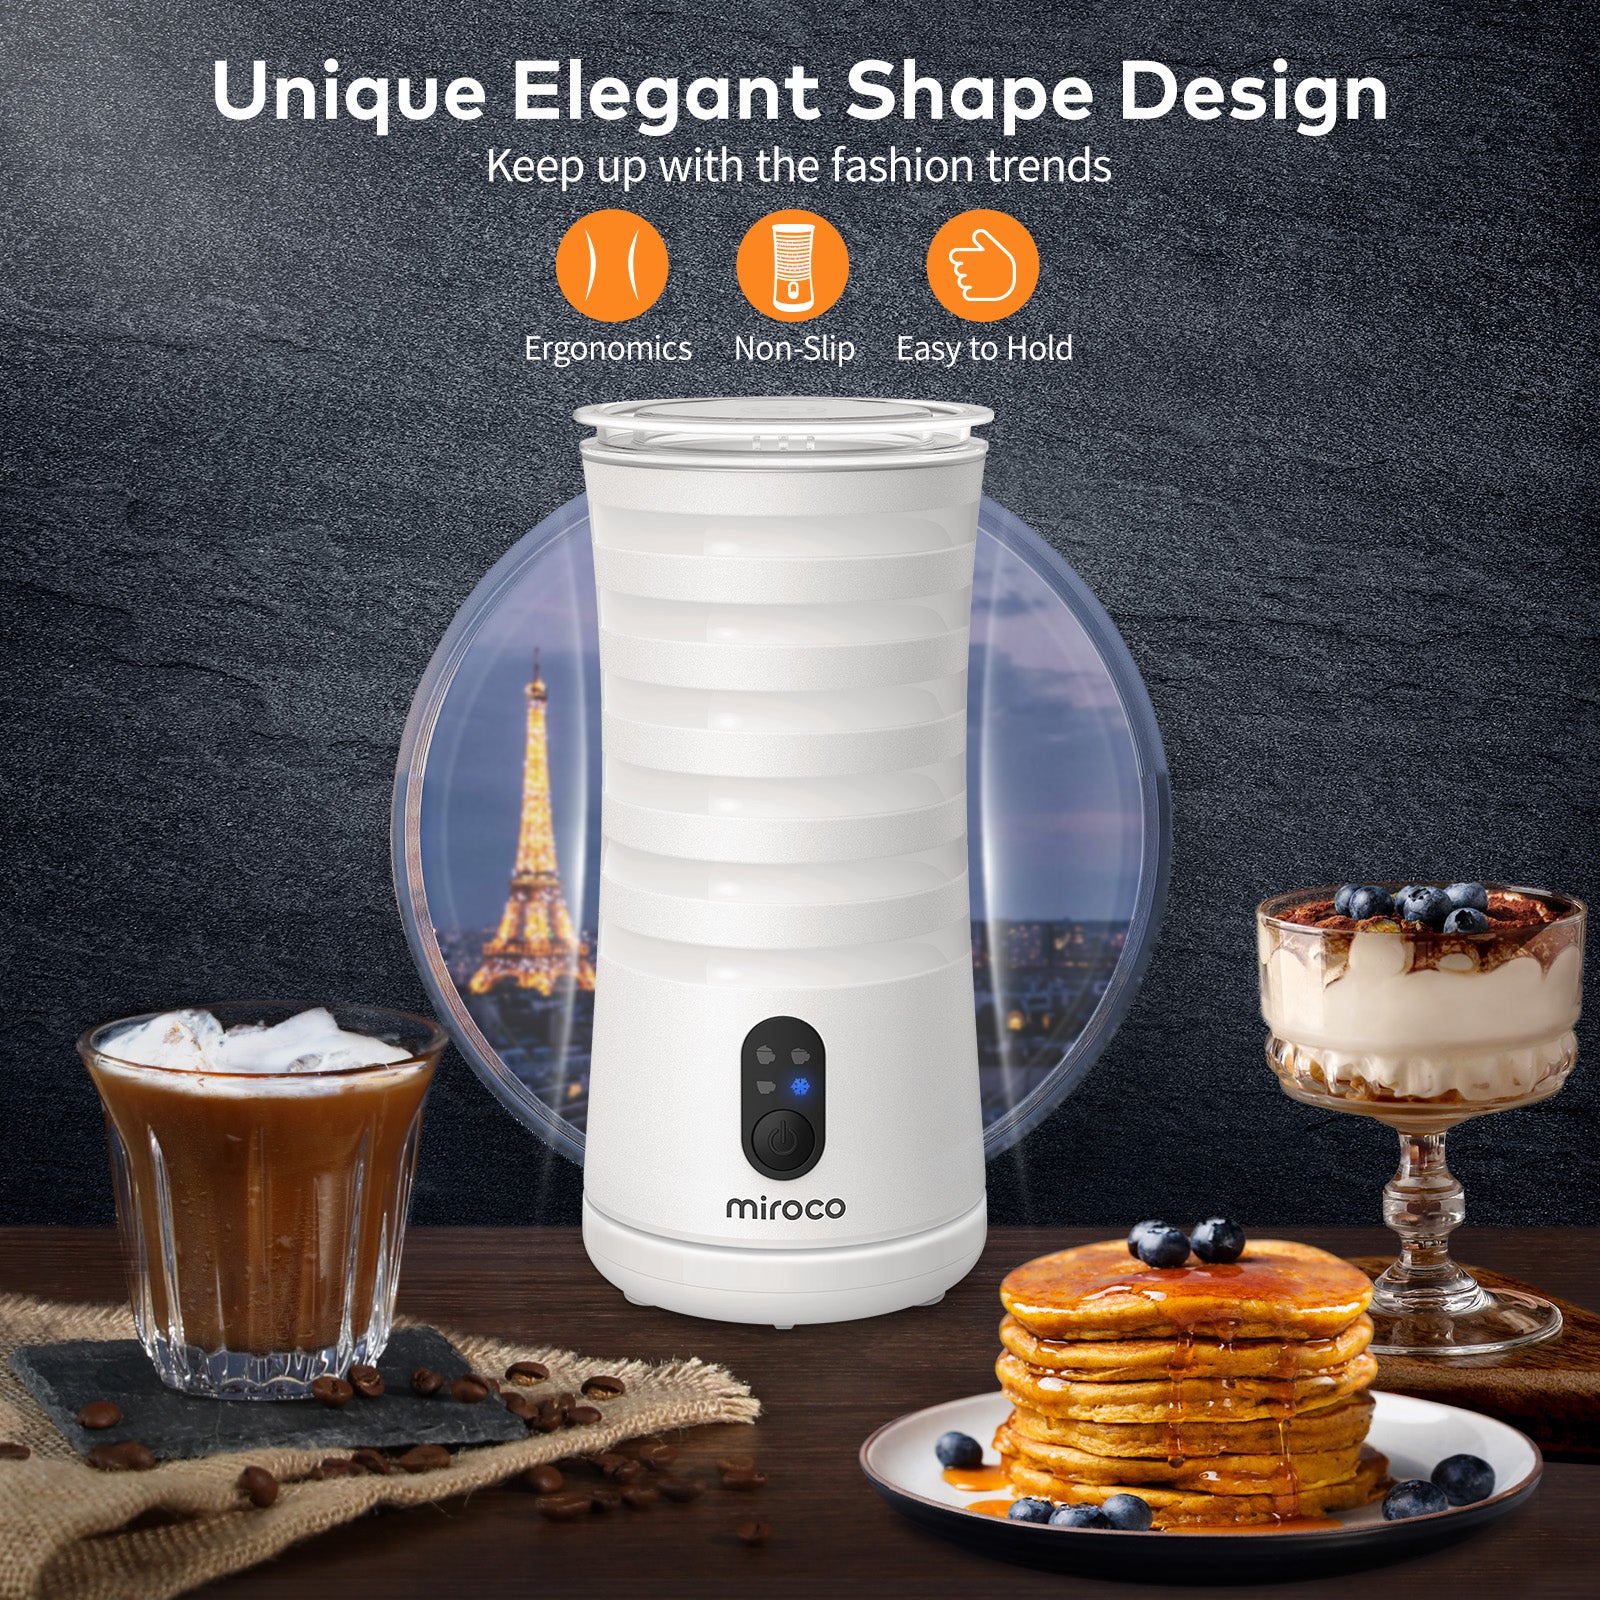 Electric Frother for Effortless Frothing of Pet Shampoos